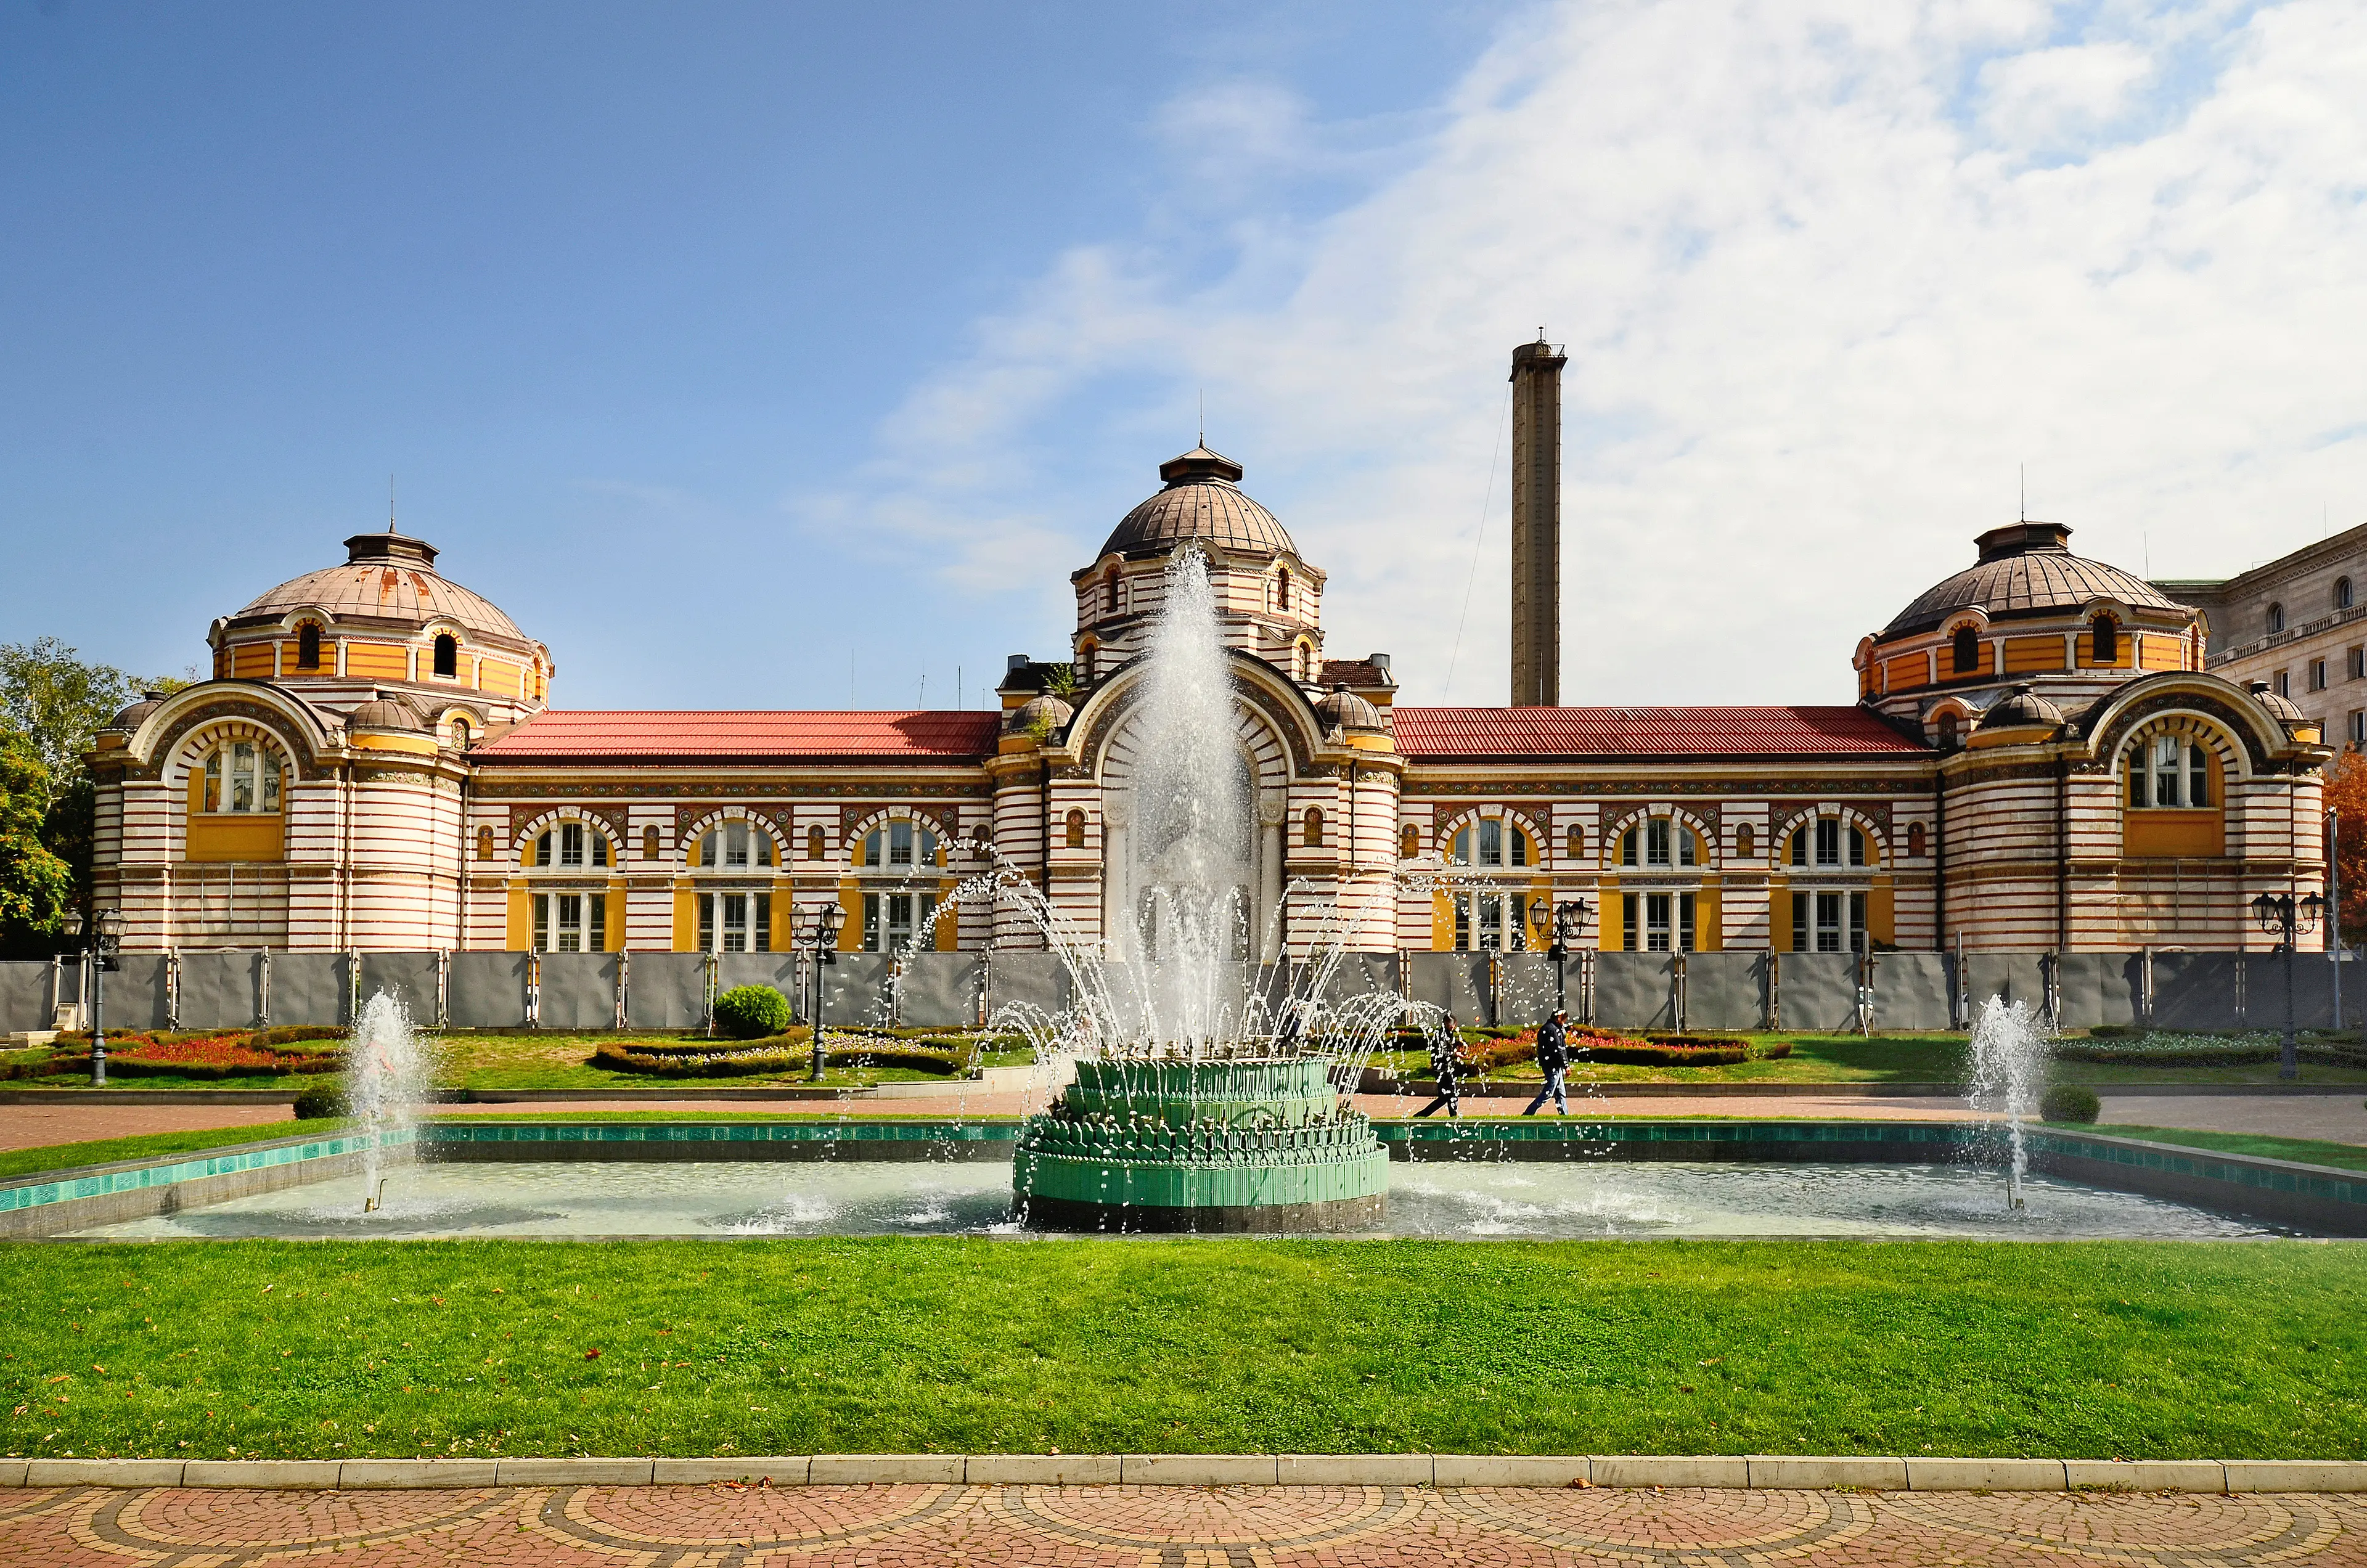 The fountain in front of the city's mineral baths complex